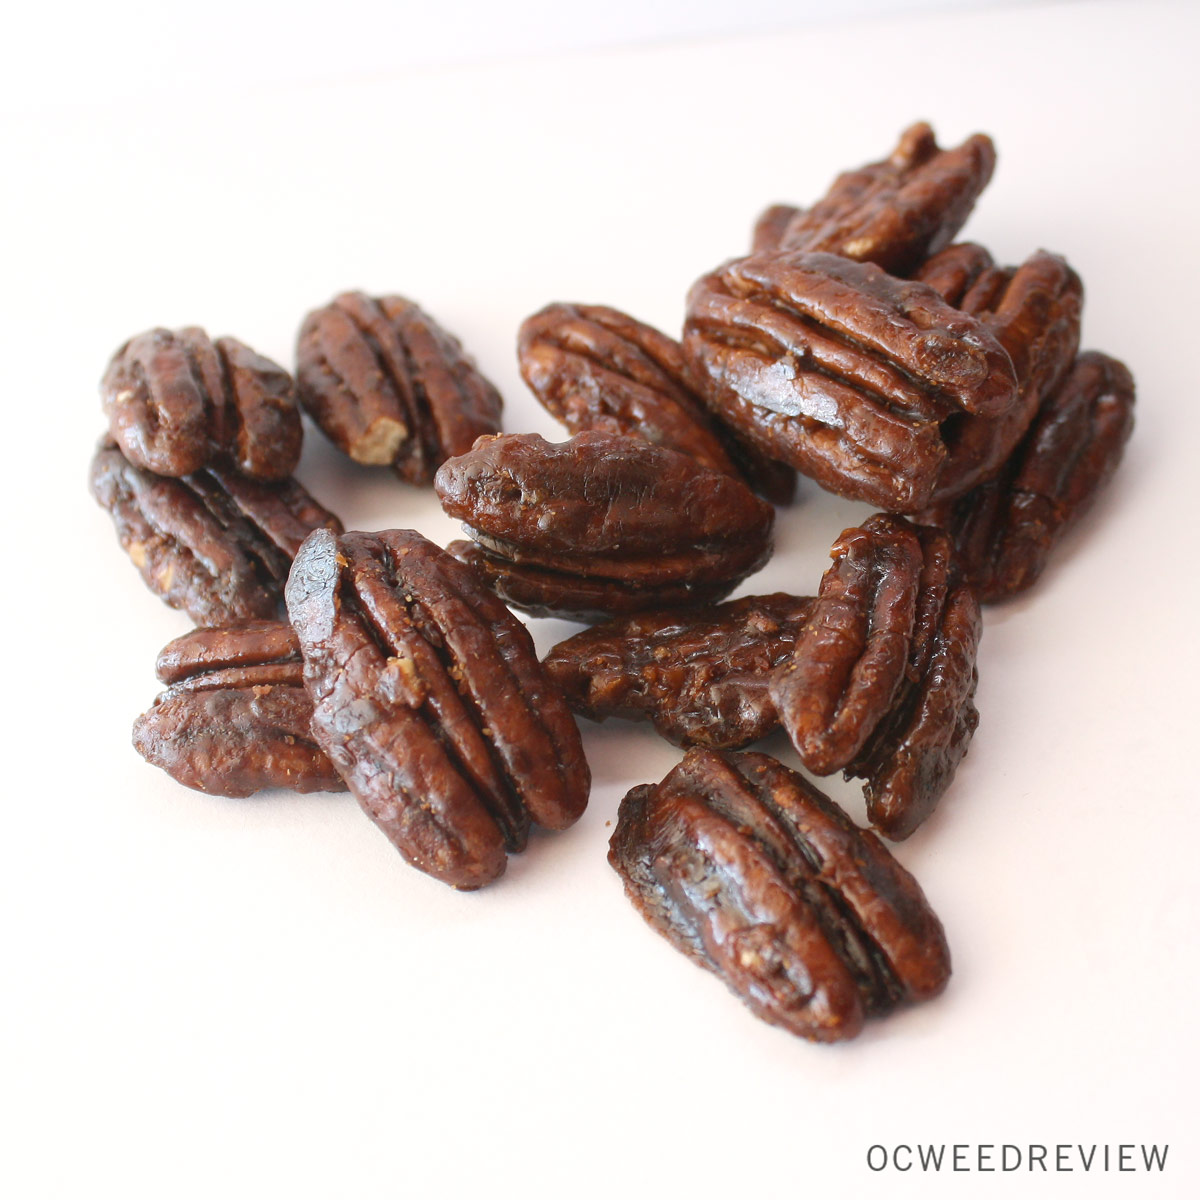 Medicated Glazed Pecans from Auntie Dolores Edible Review